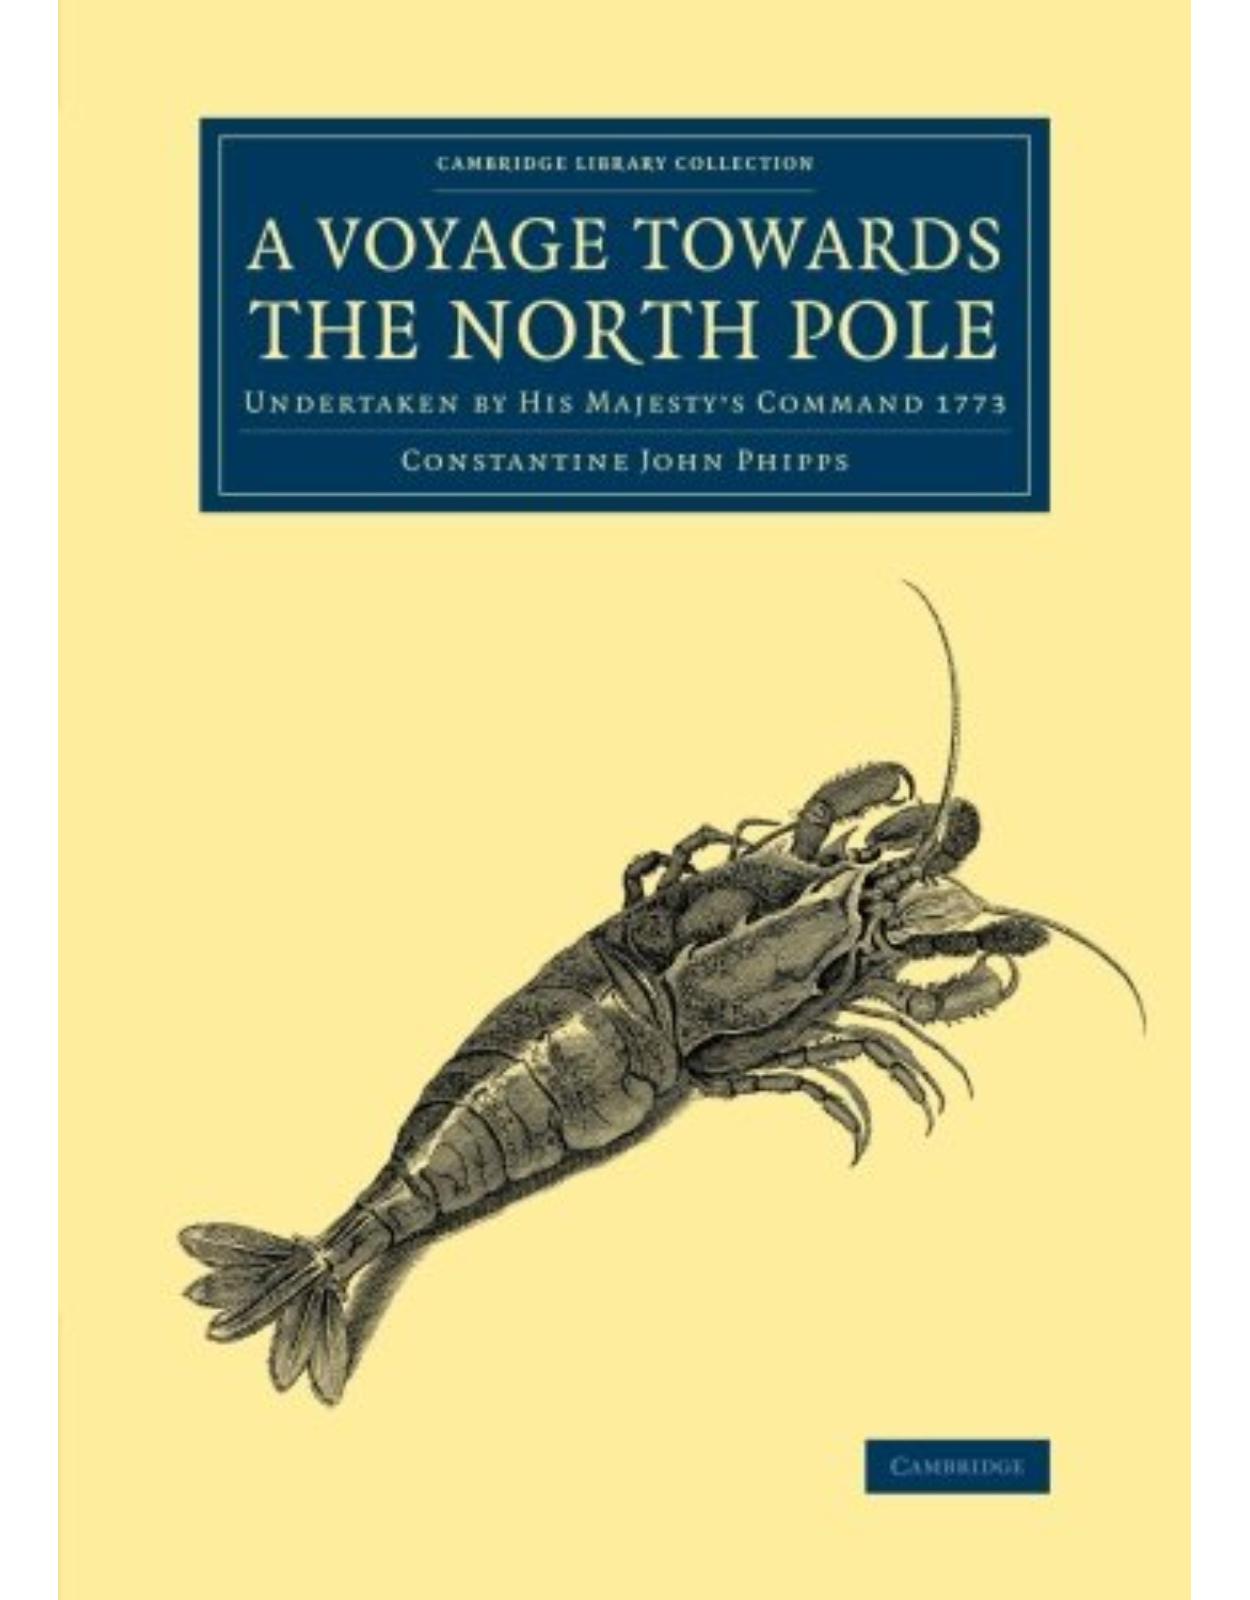 A Voyage towards the North Pole: Undertaken by His MajestyÂ’s Command 1773 (Cambridge Library Collection - Polar Exploration)